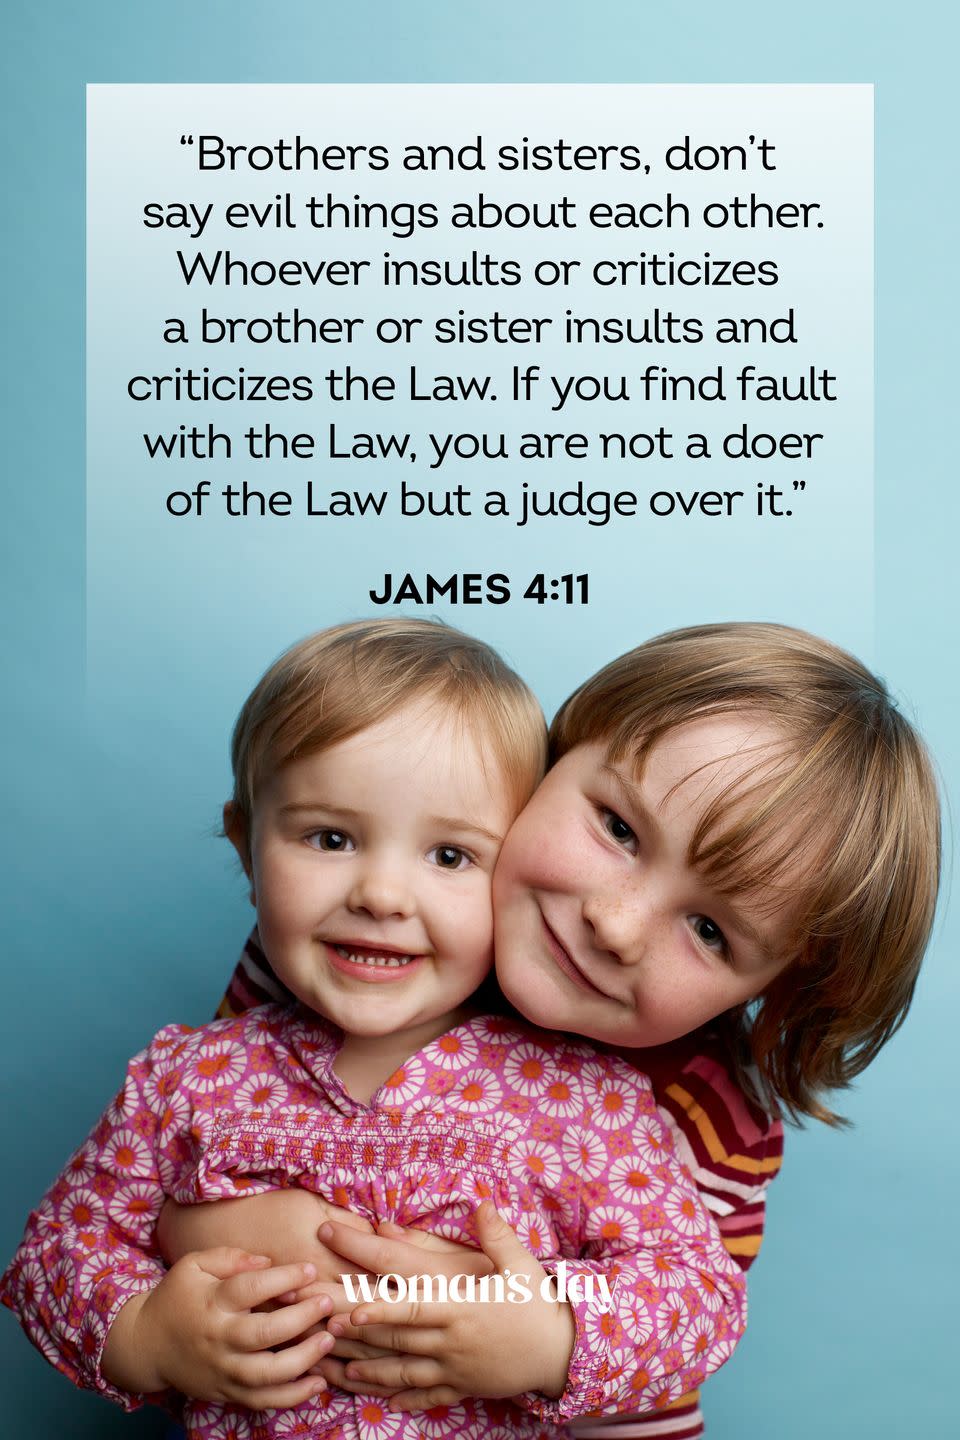 <p>“Brothers and sisters, don’t say evil things about each other. Whoever insults or criticizes a brother or sister insults and criticizes the Law. If you find fault with the Law, you are not a doer of the Law but a judge over it.”</p><p><strong>The Good News:</strong> We are all the same in God’s eyes.</p>